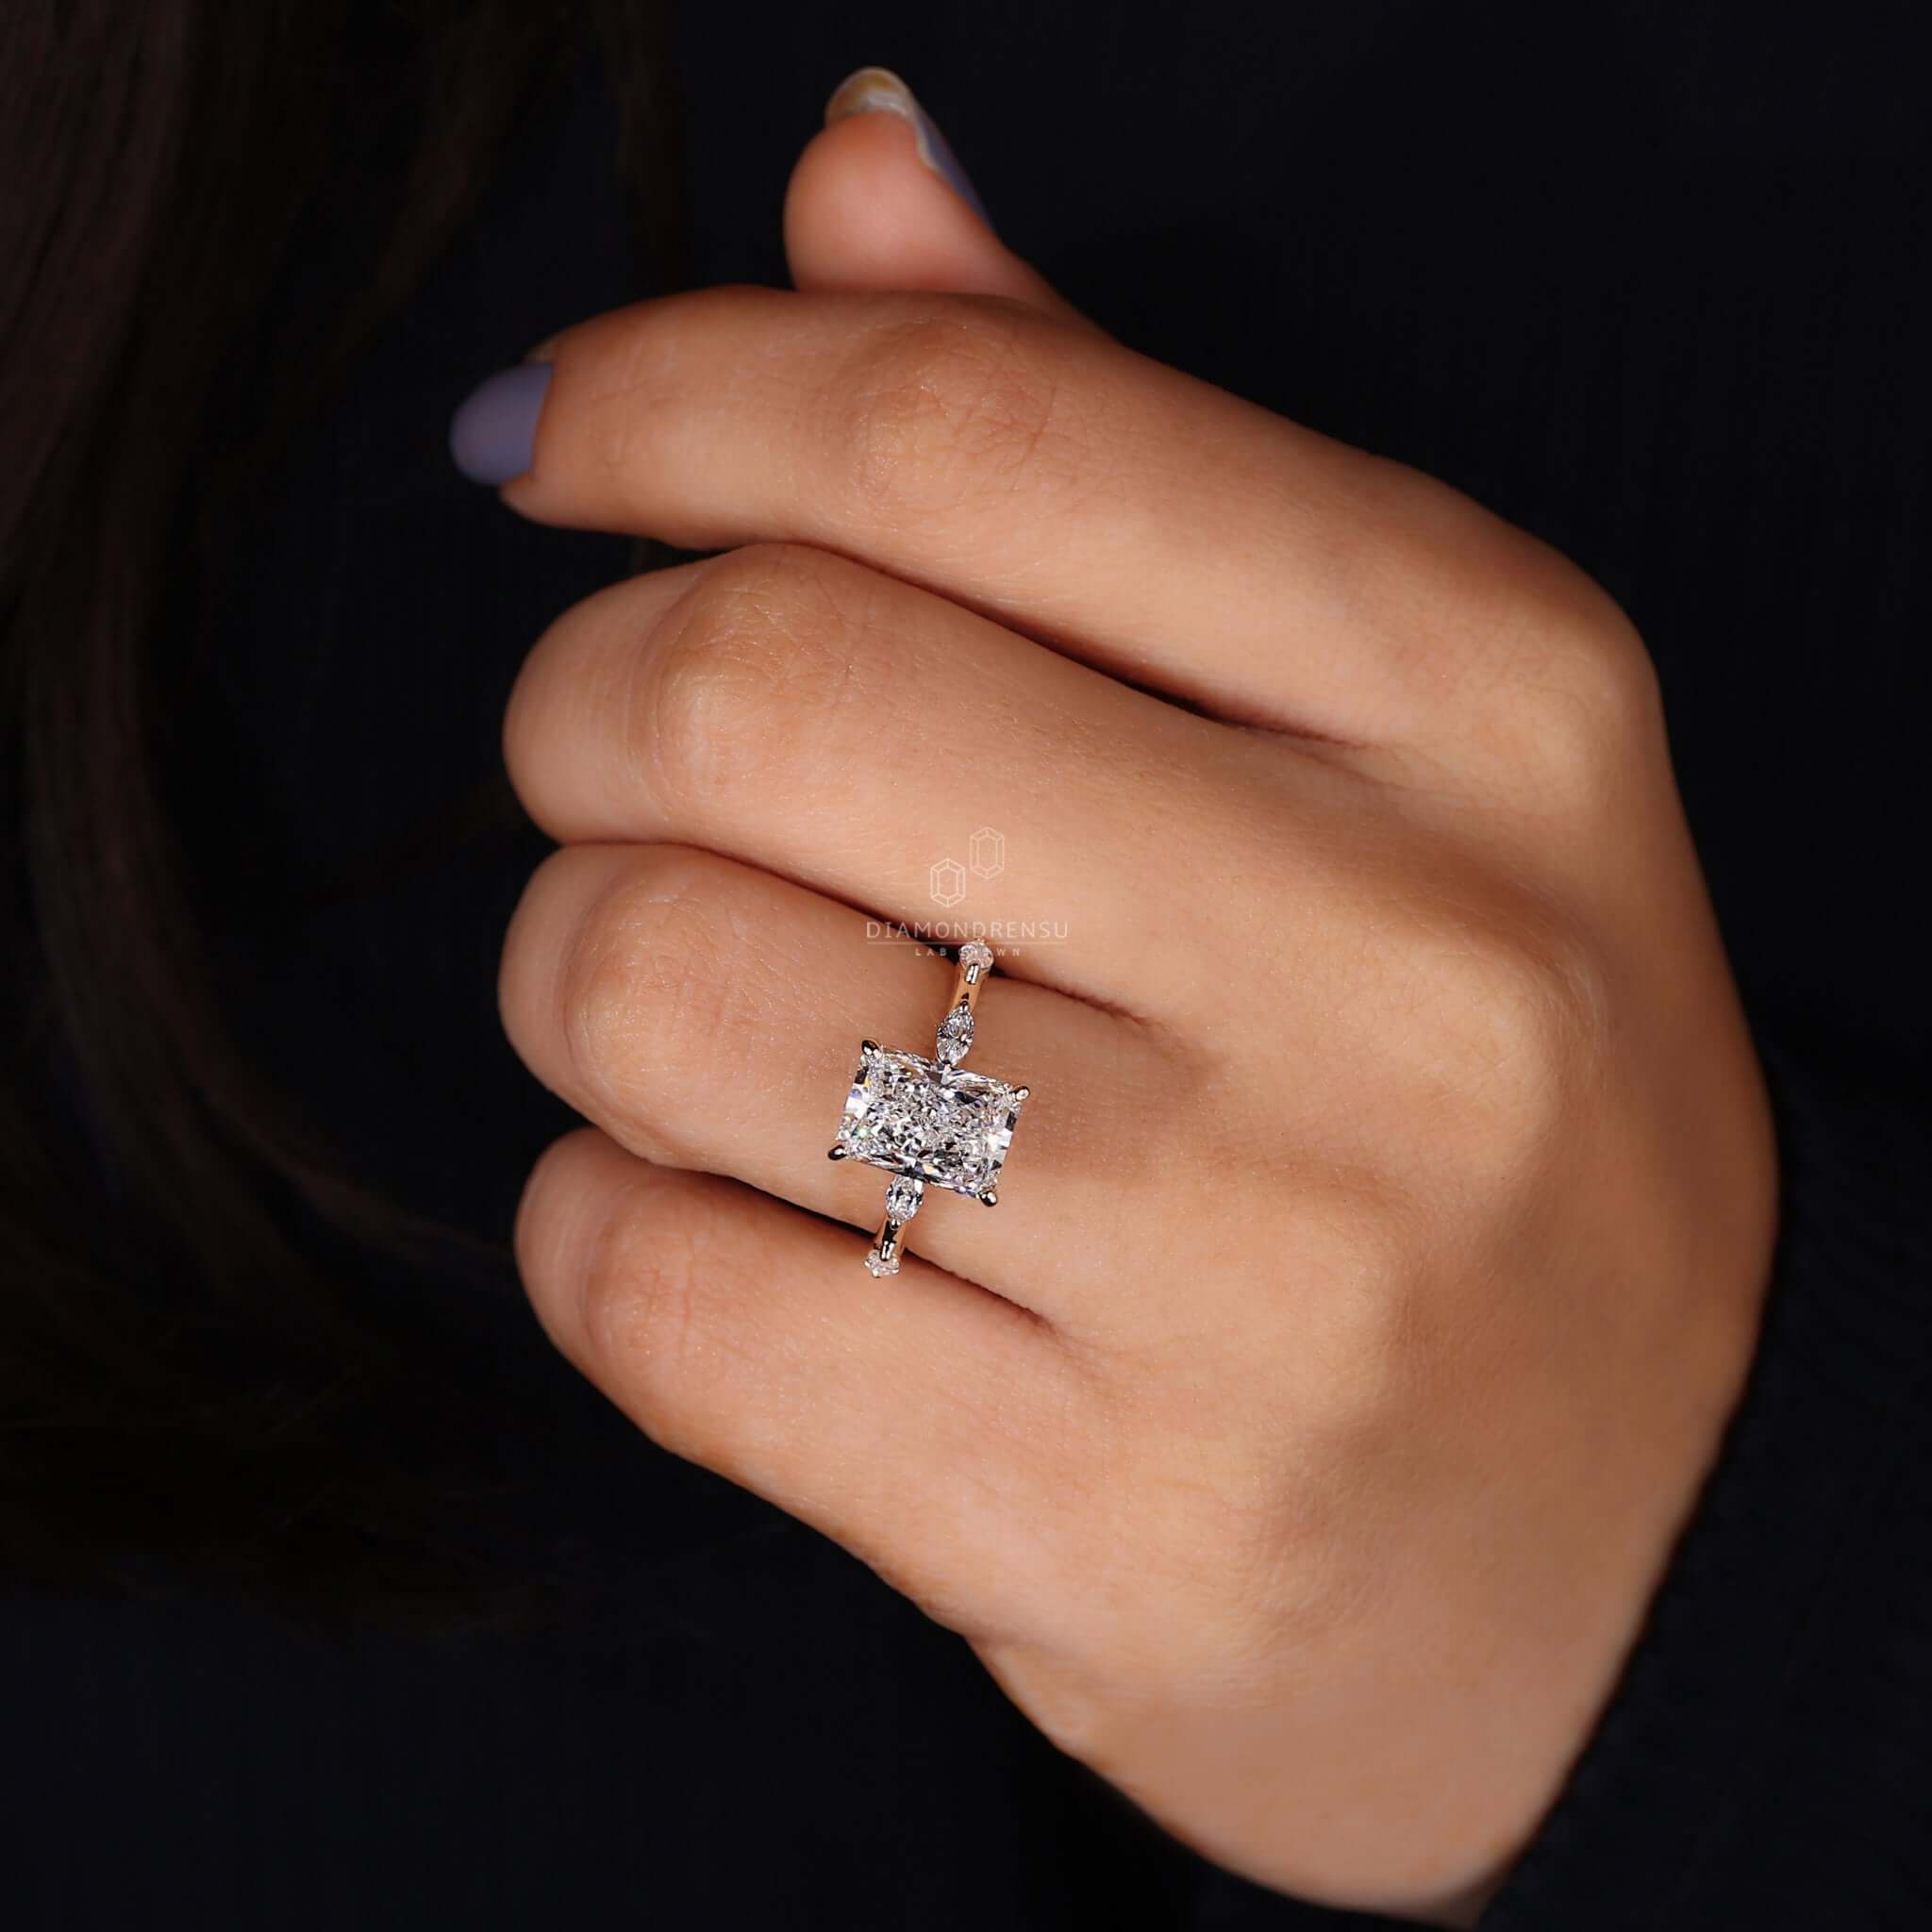 Exquisite hidden halo setting in a diamond engagement ring, offering a unique and romantic appeal.